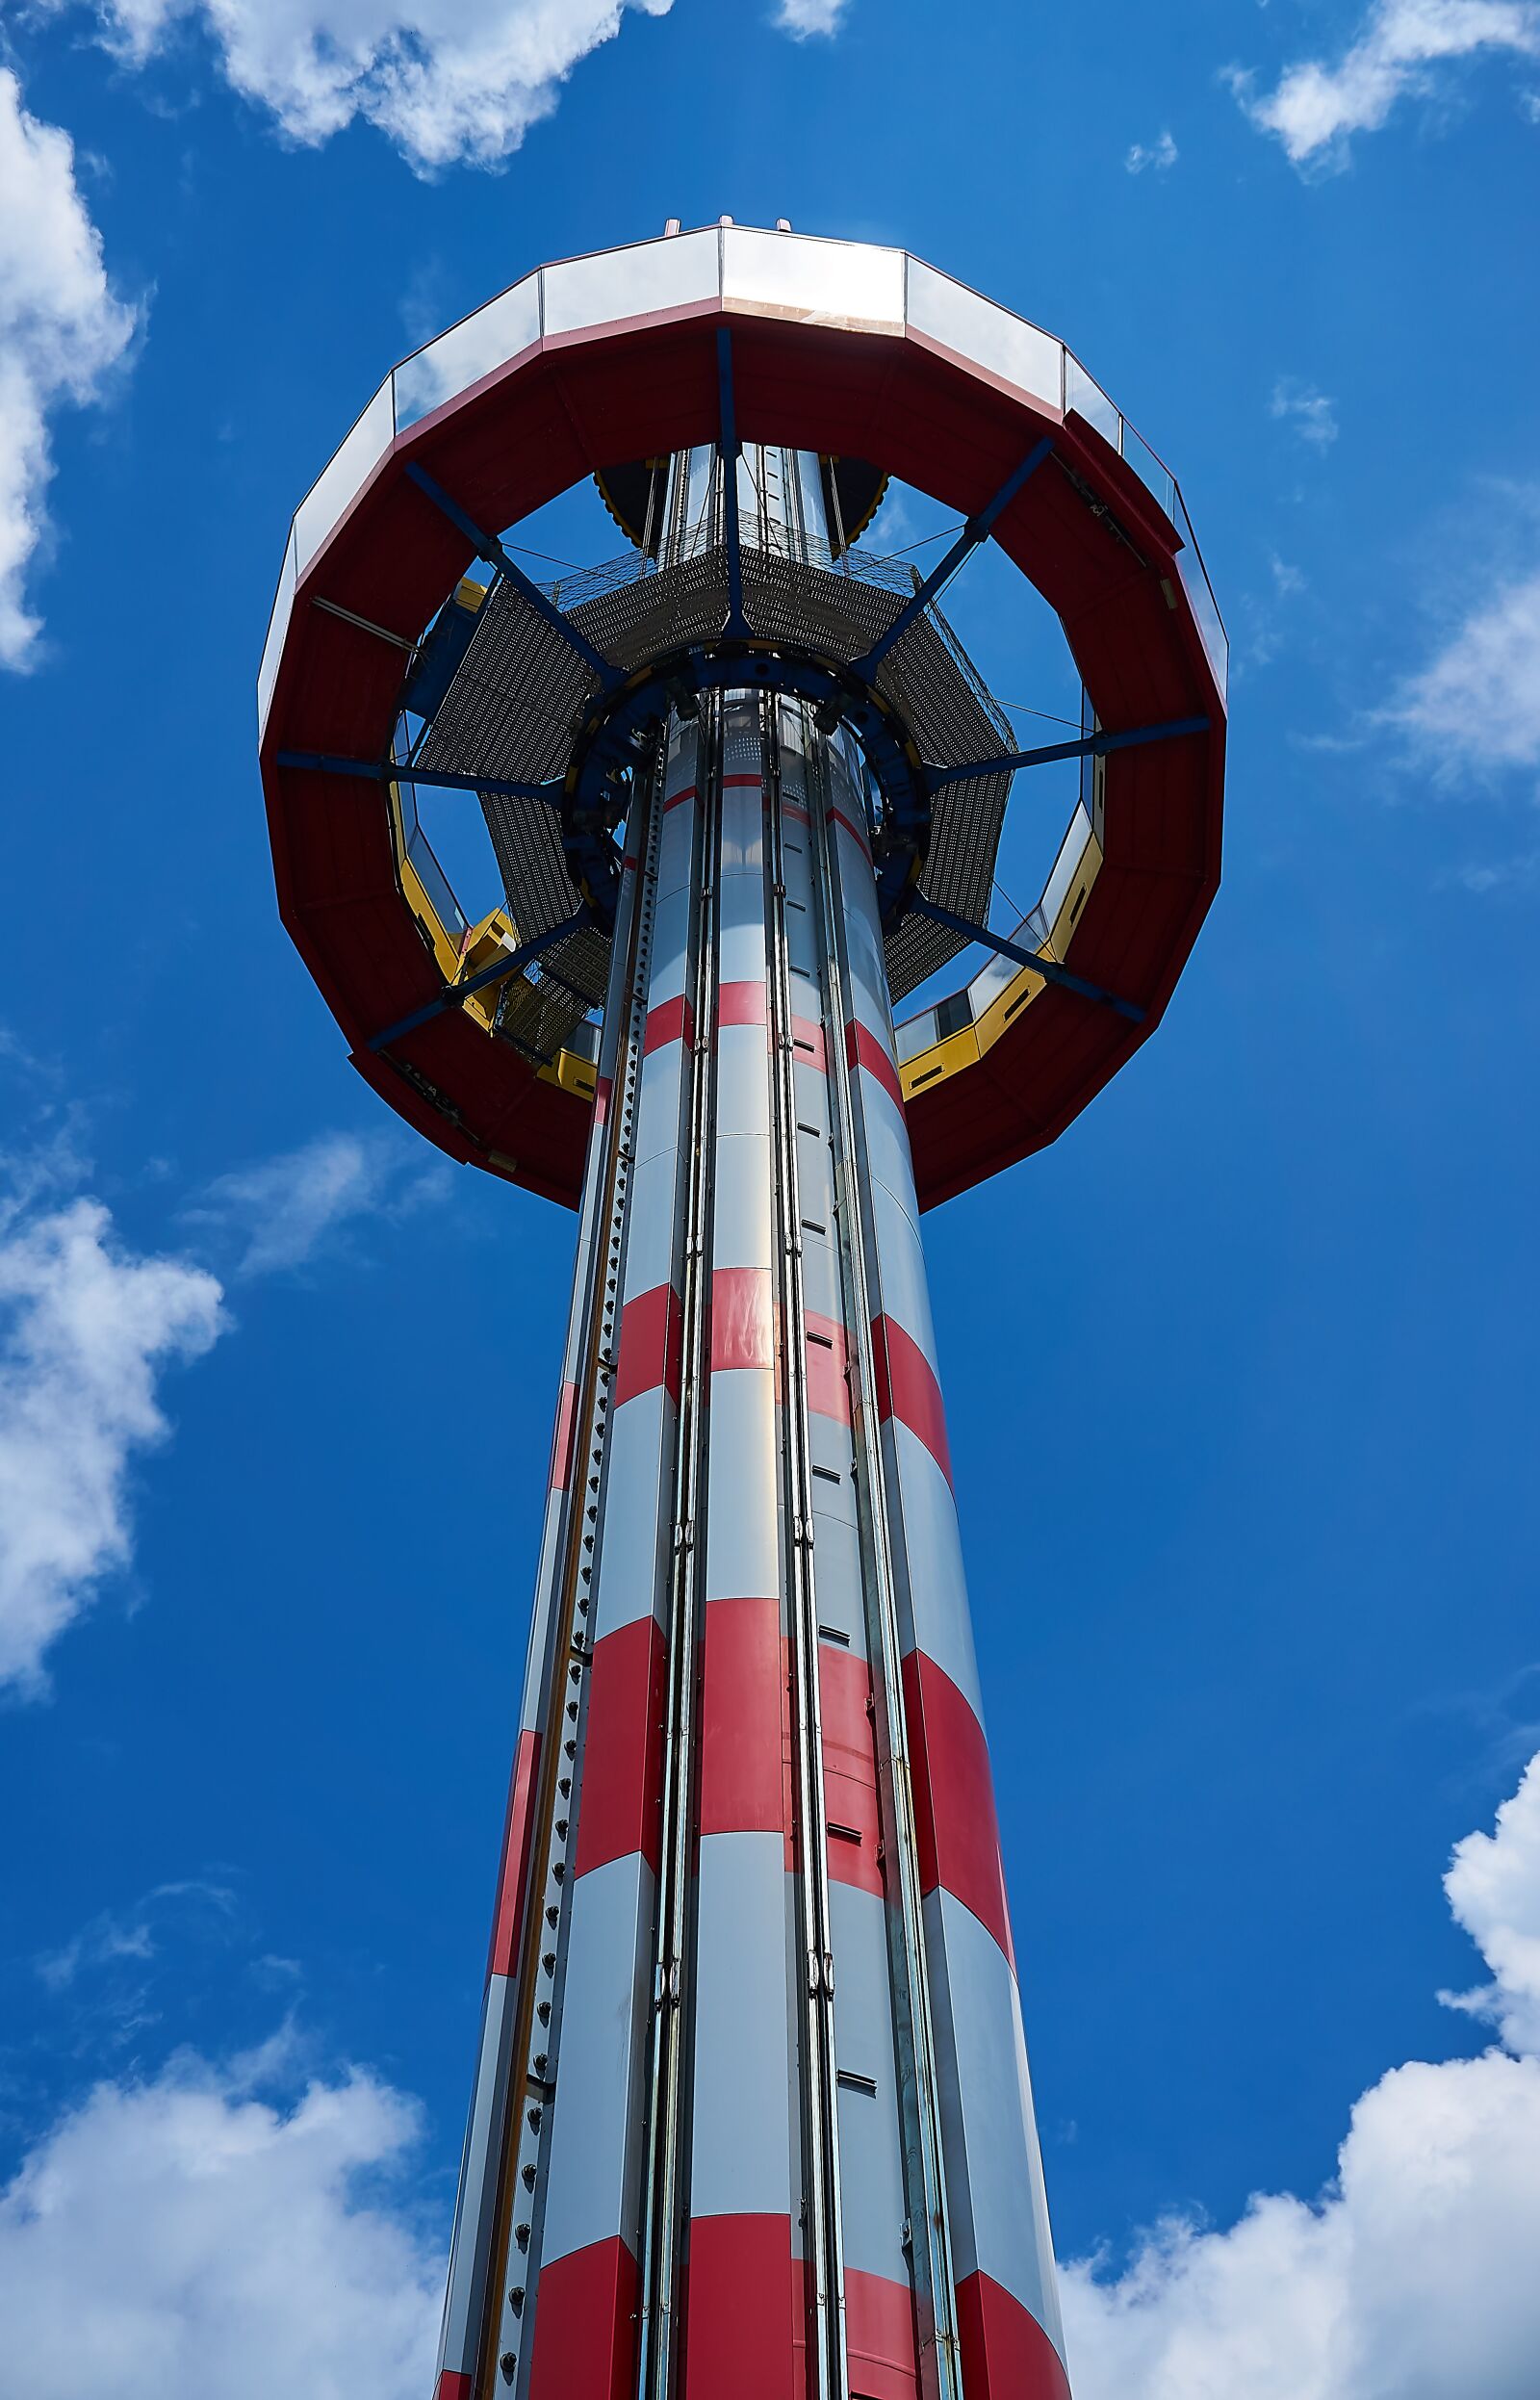 Sony a6000 + Sony E PZ 16-50 mm F3.5-5.6 OSS (SELP1650) sample photo. Legoland, observation tower, panoramic photography